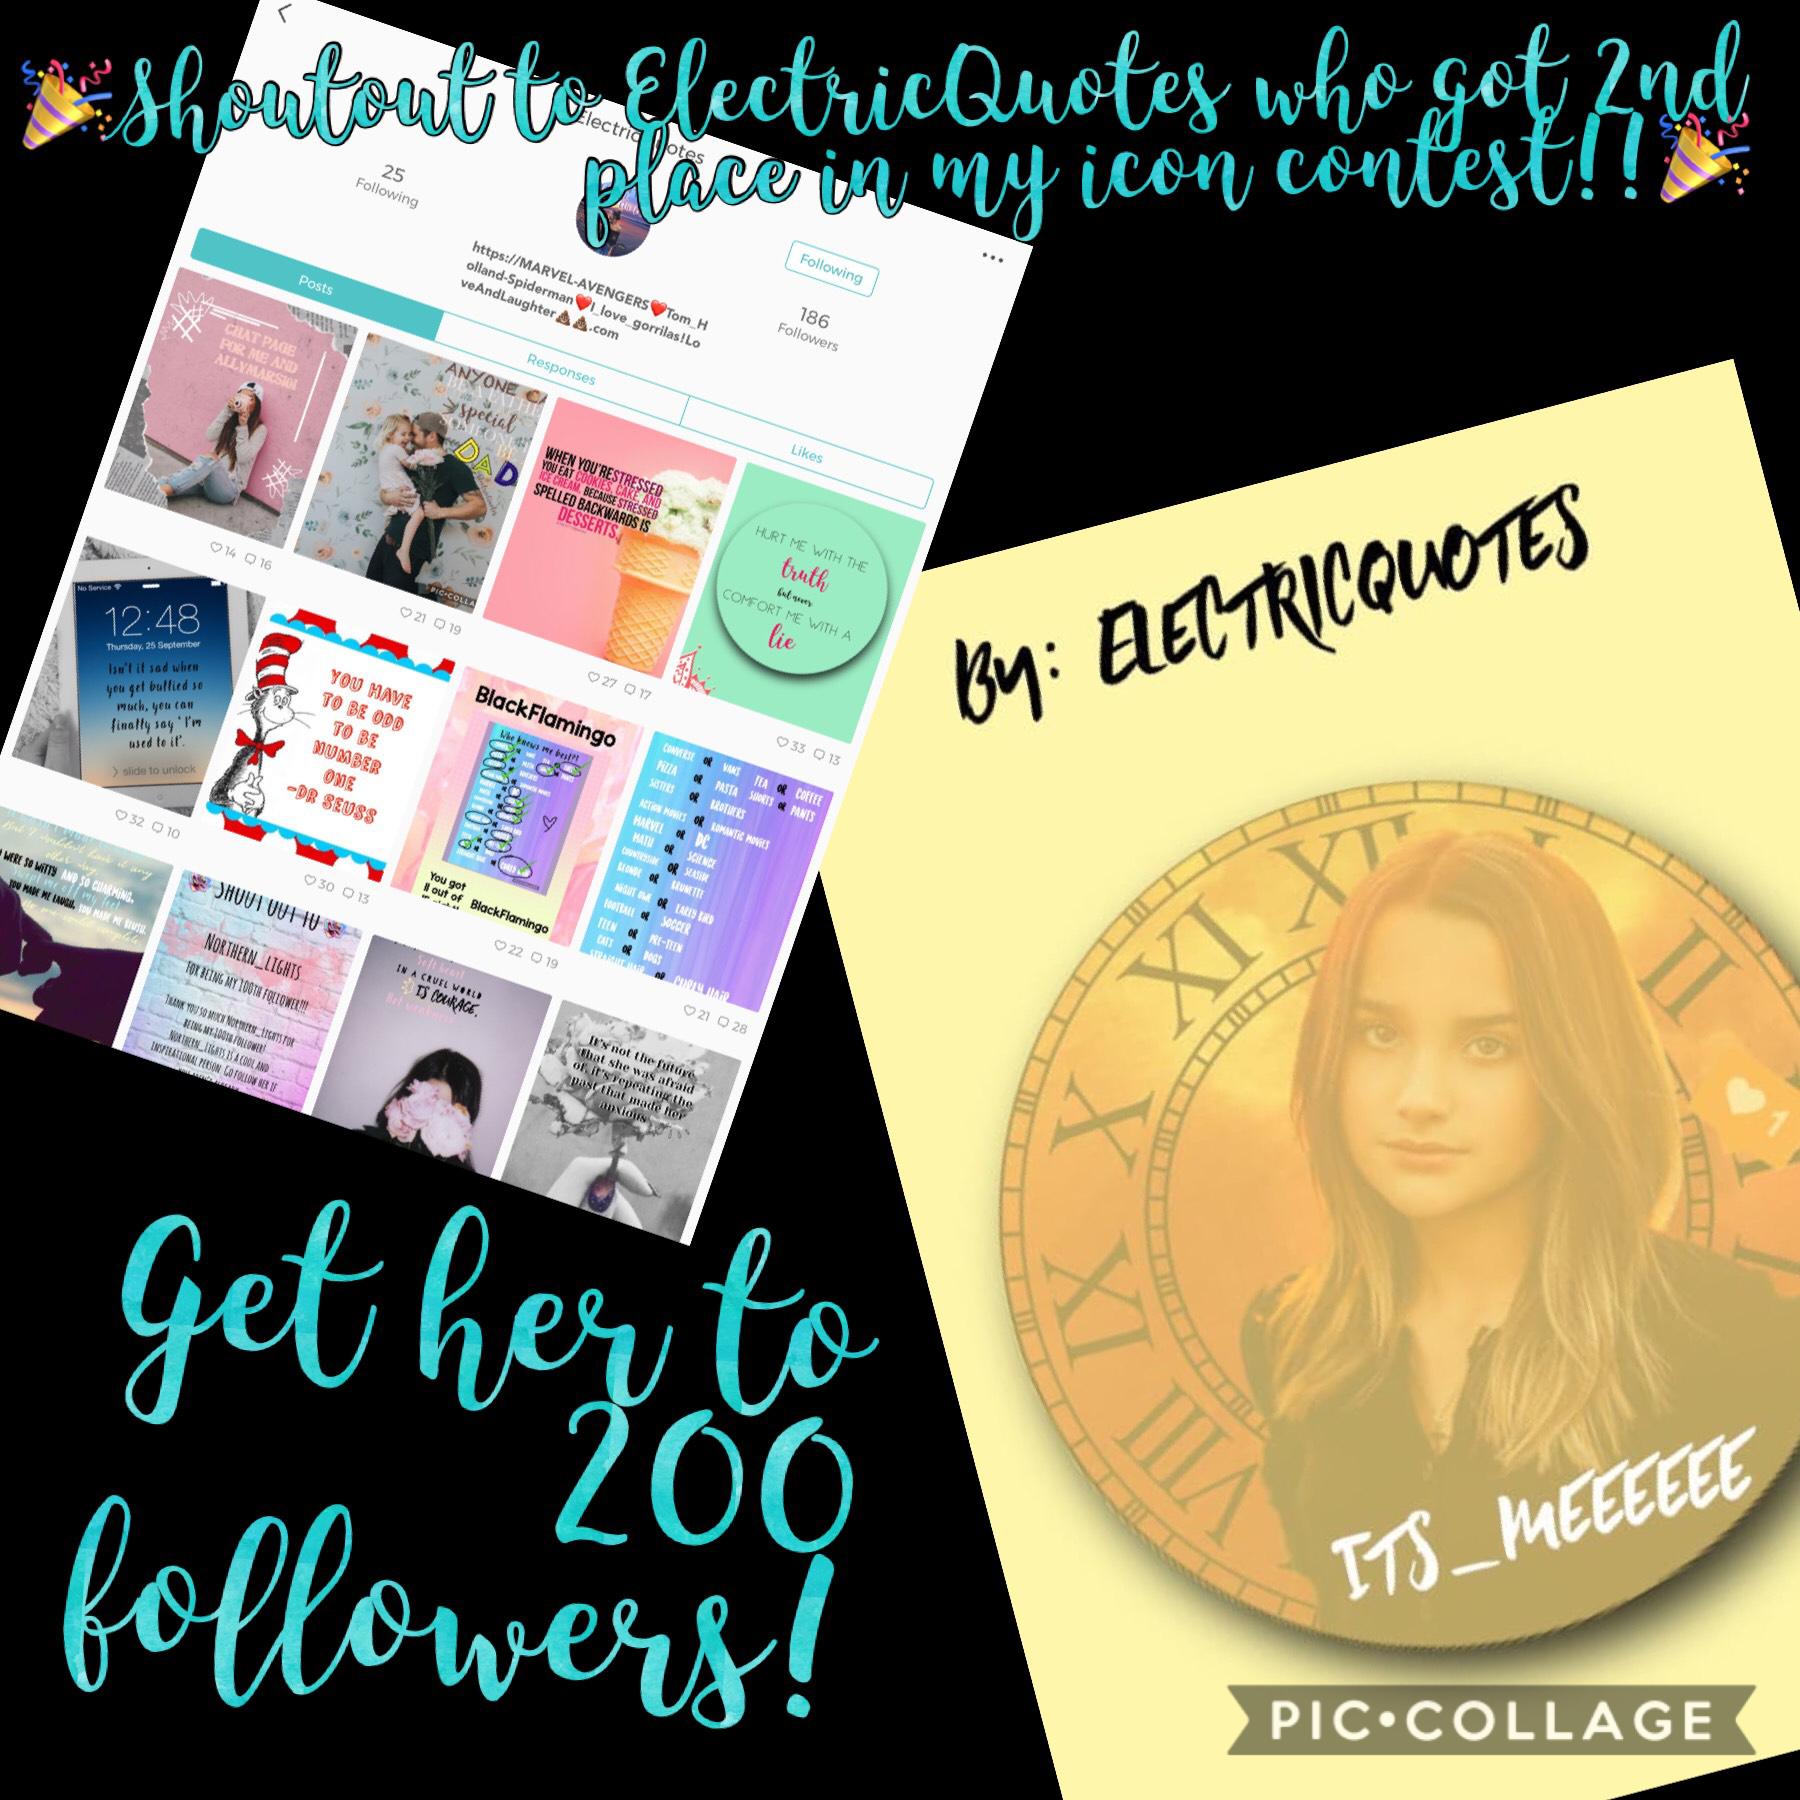 🎉tap🎉
Congrats EletricQuotes!! 
Go and get that queen👑 to 200 followers!